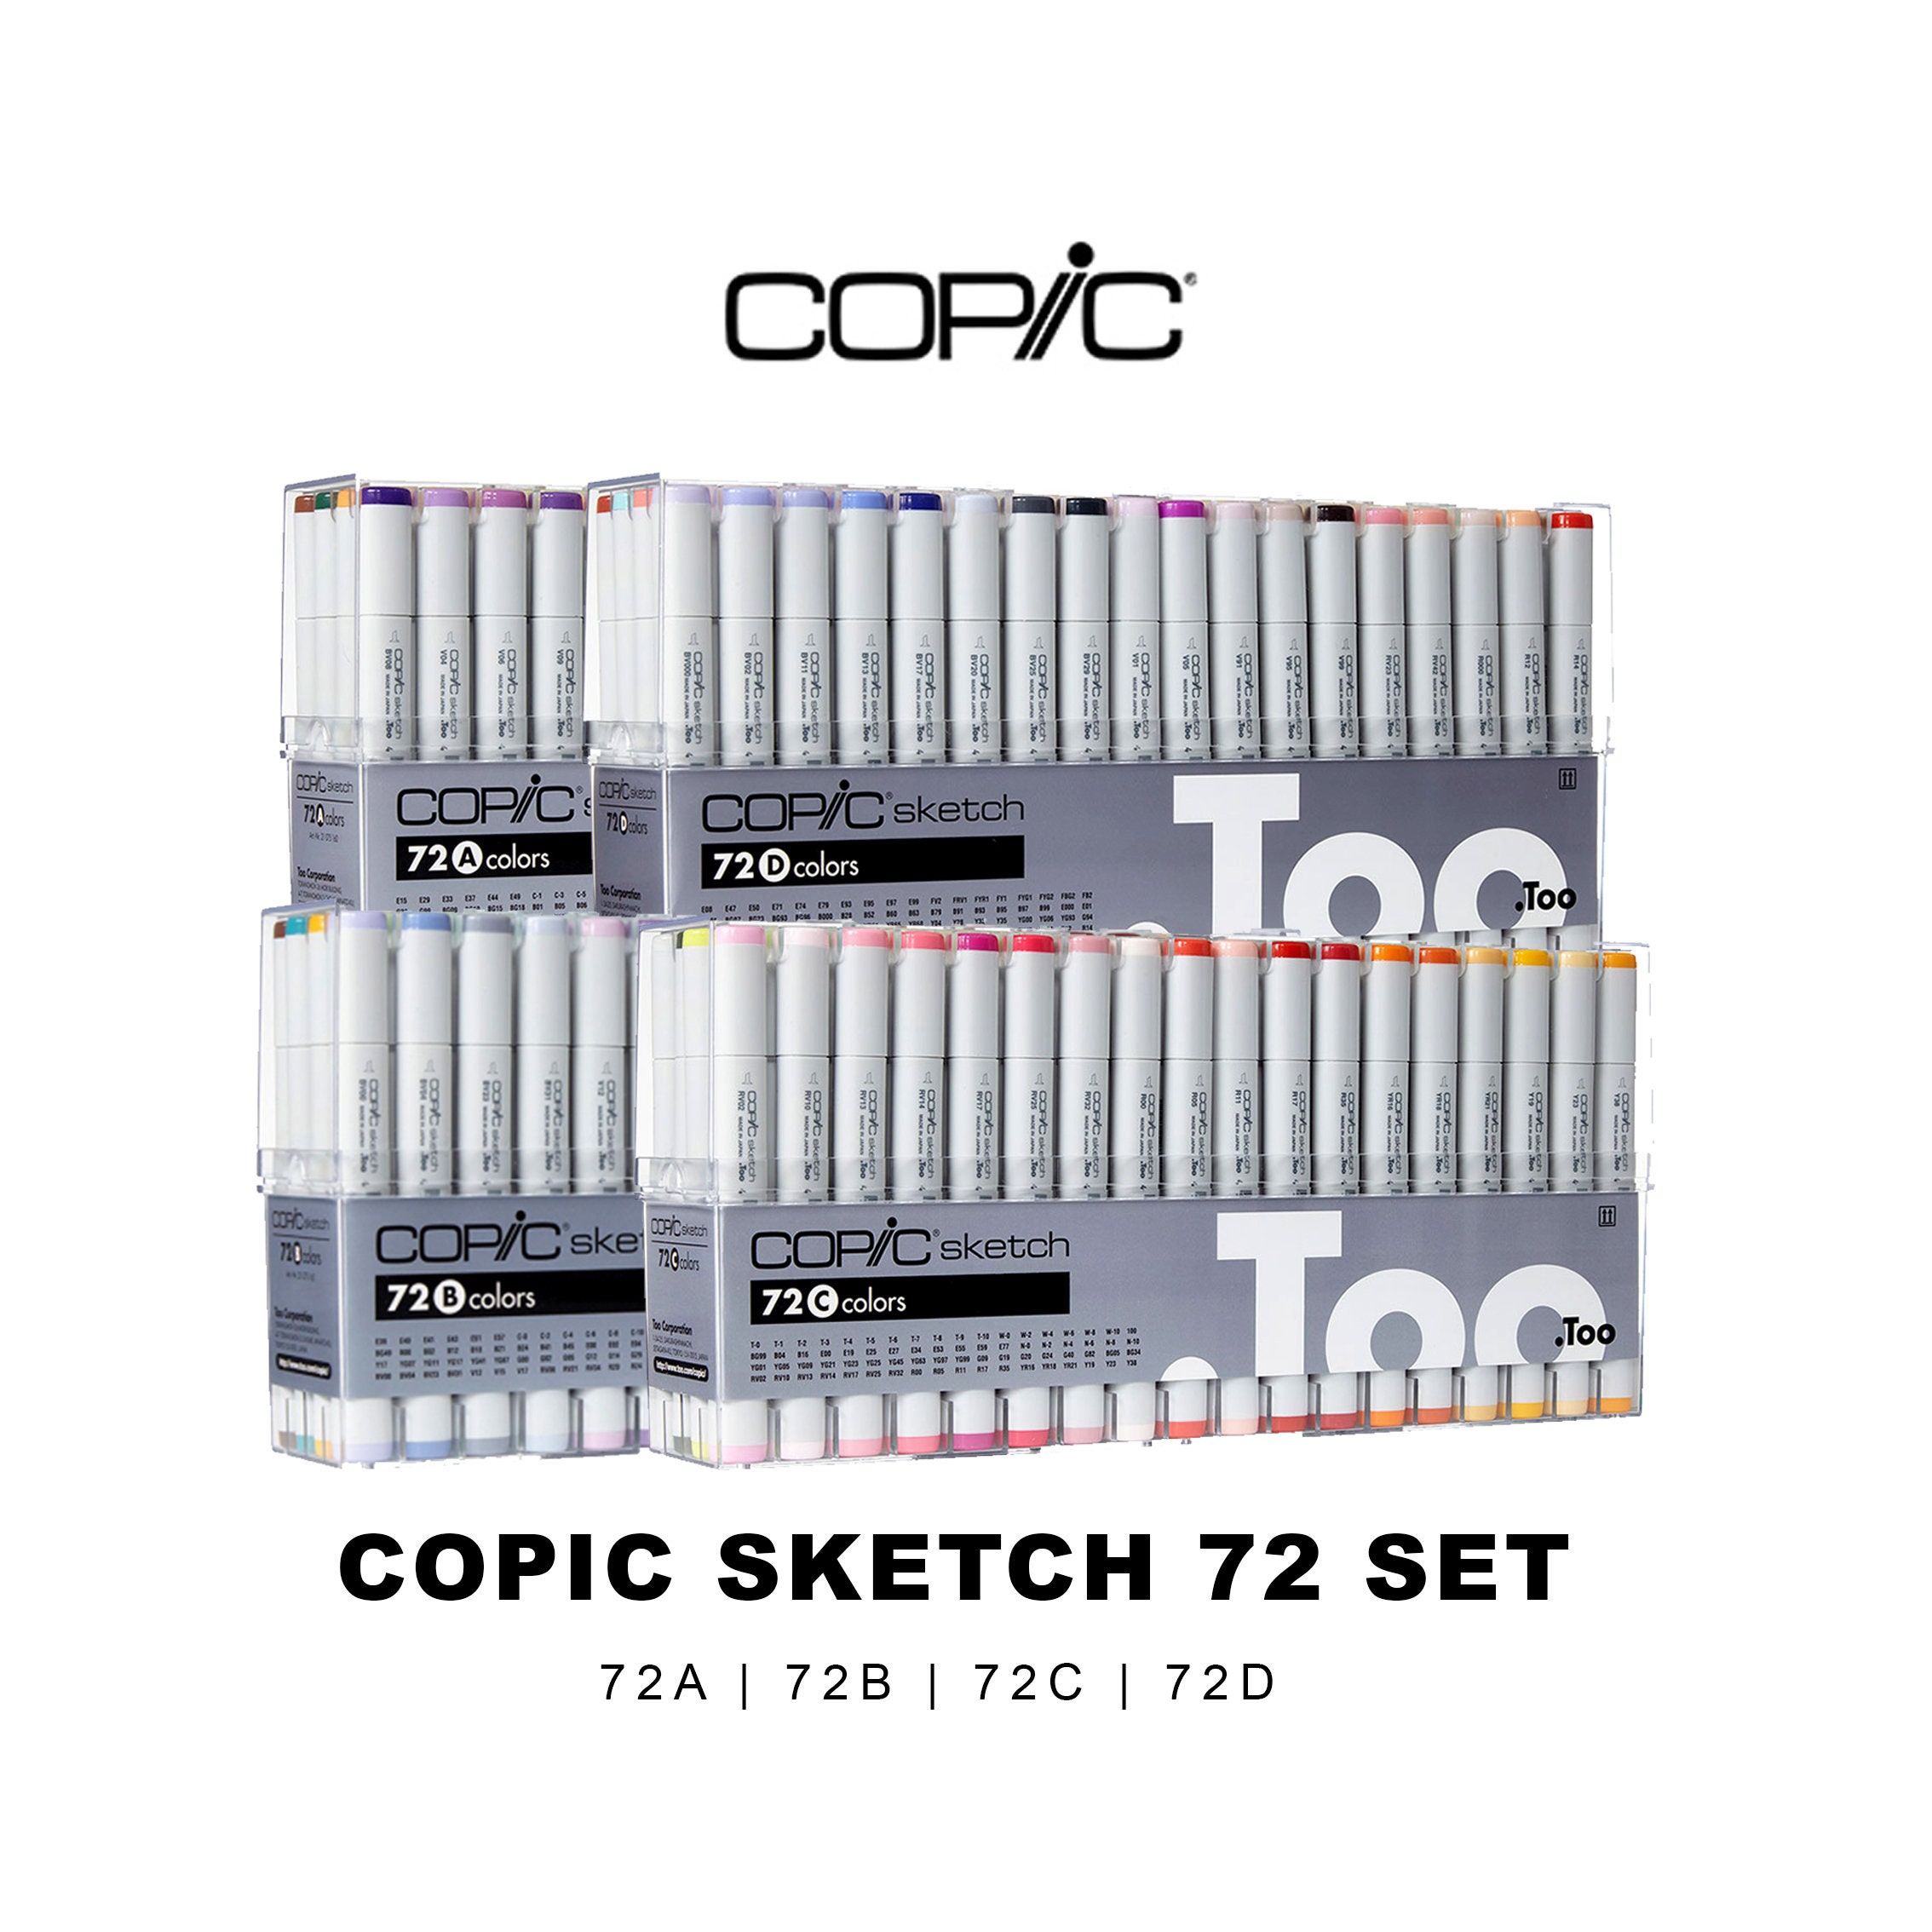 Copic Marker 72 Piece Sketch Set E (Twin Tipped) - Artist Markers